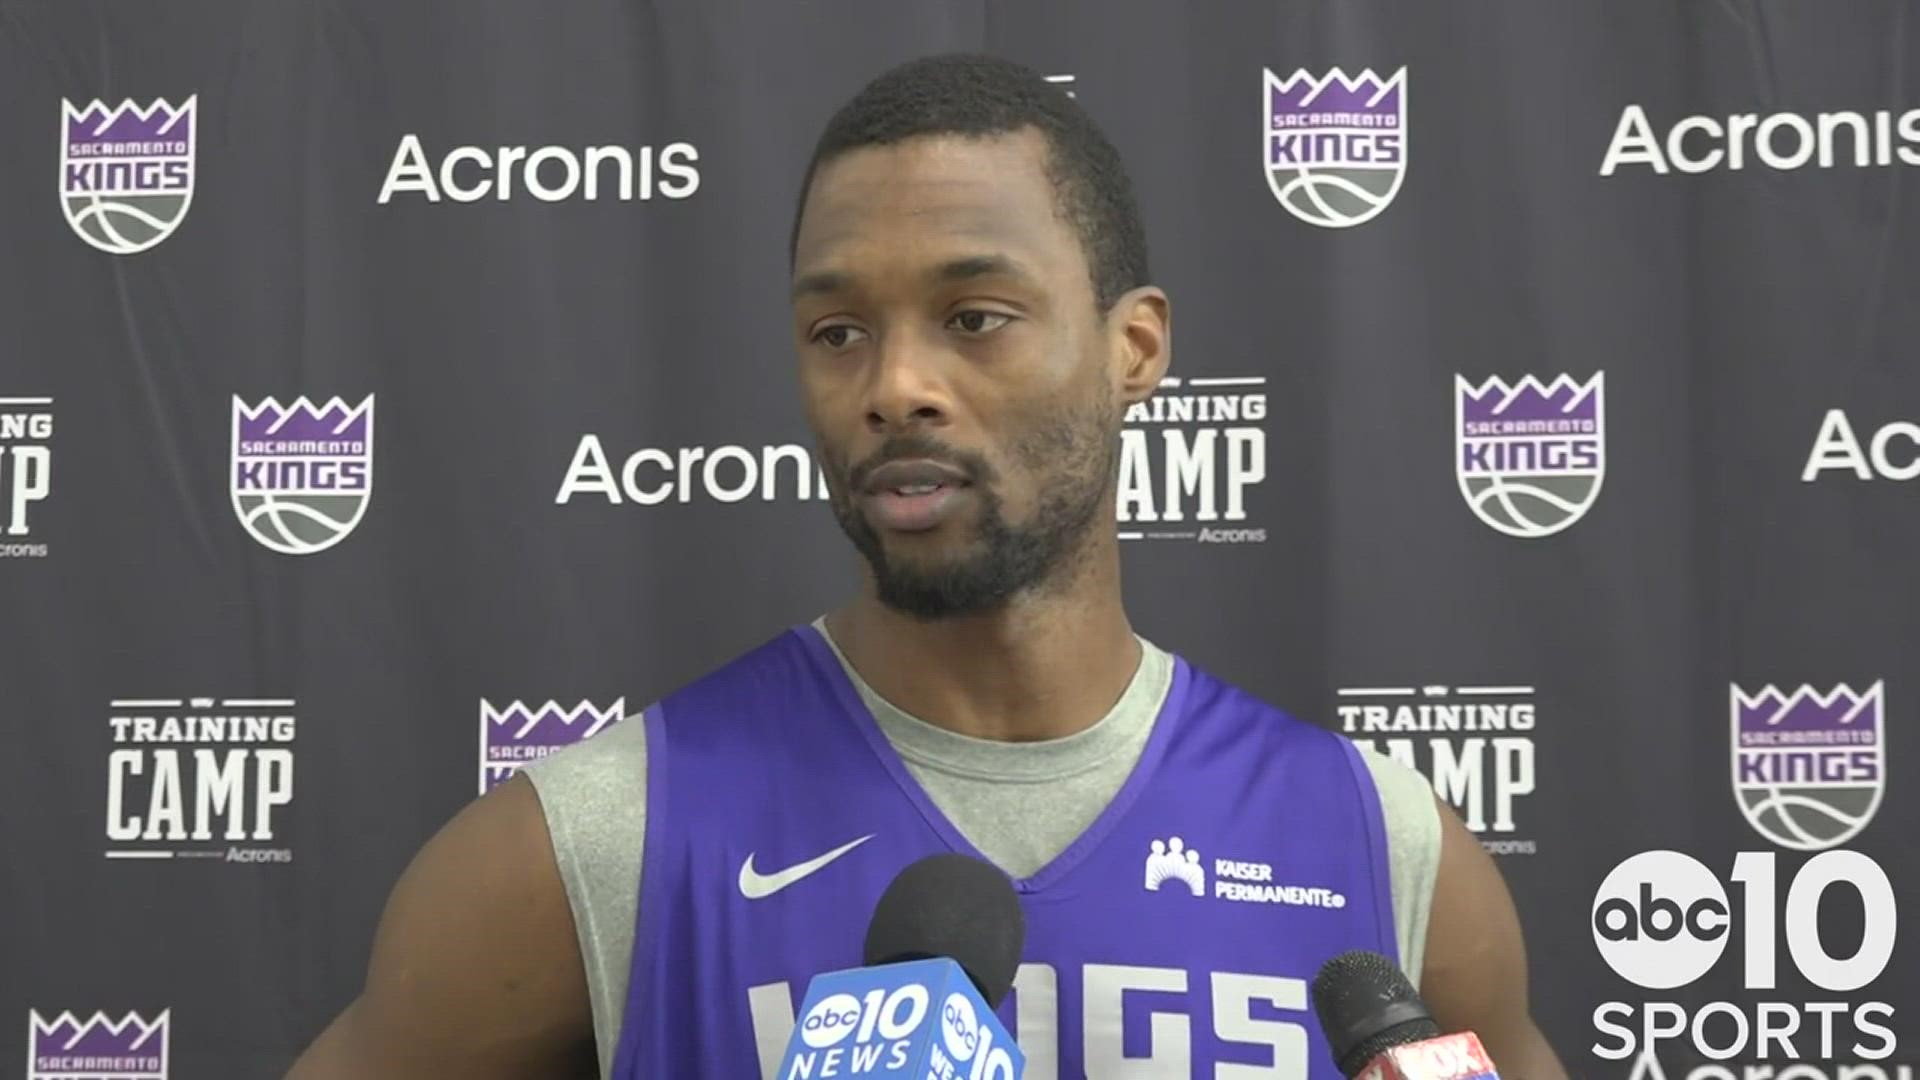 Harrison Barnes reflects on the last month of Kings training camp, a 4-0 preseason schedule and the final preparations for the upcoming season opener in Portland.